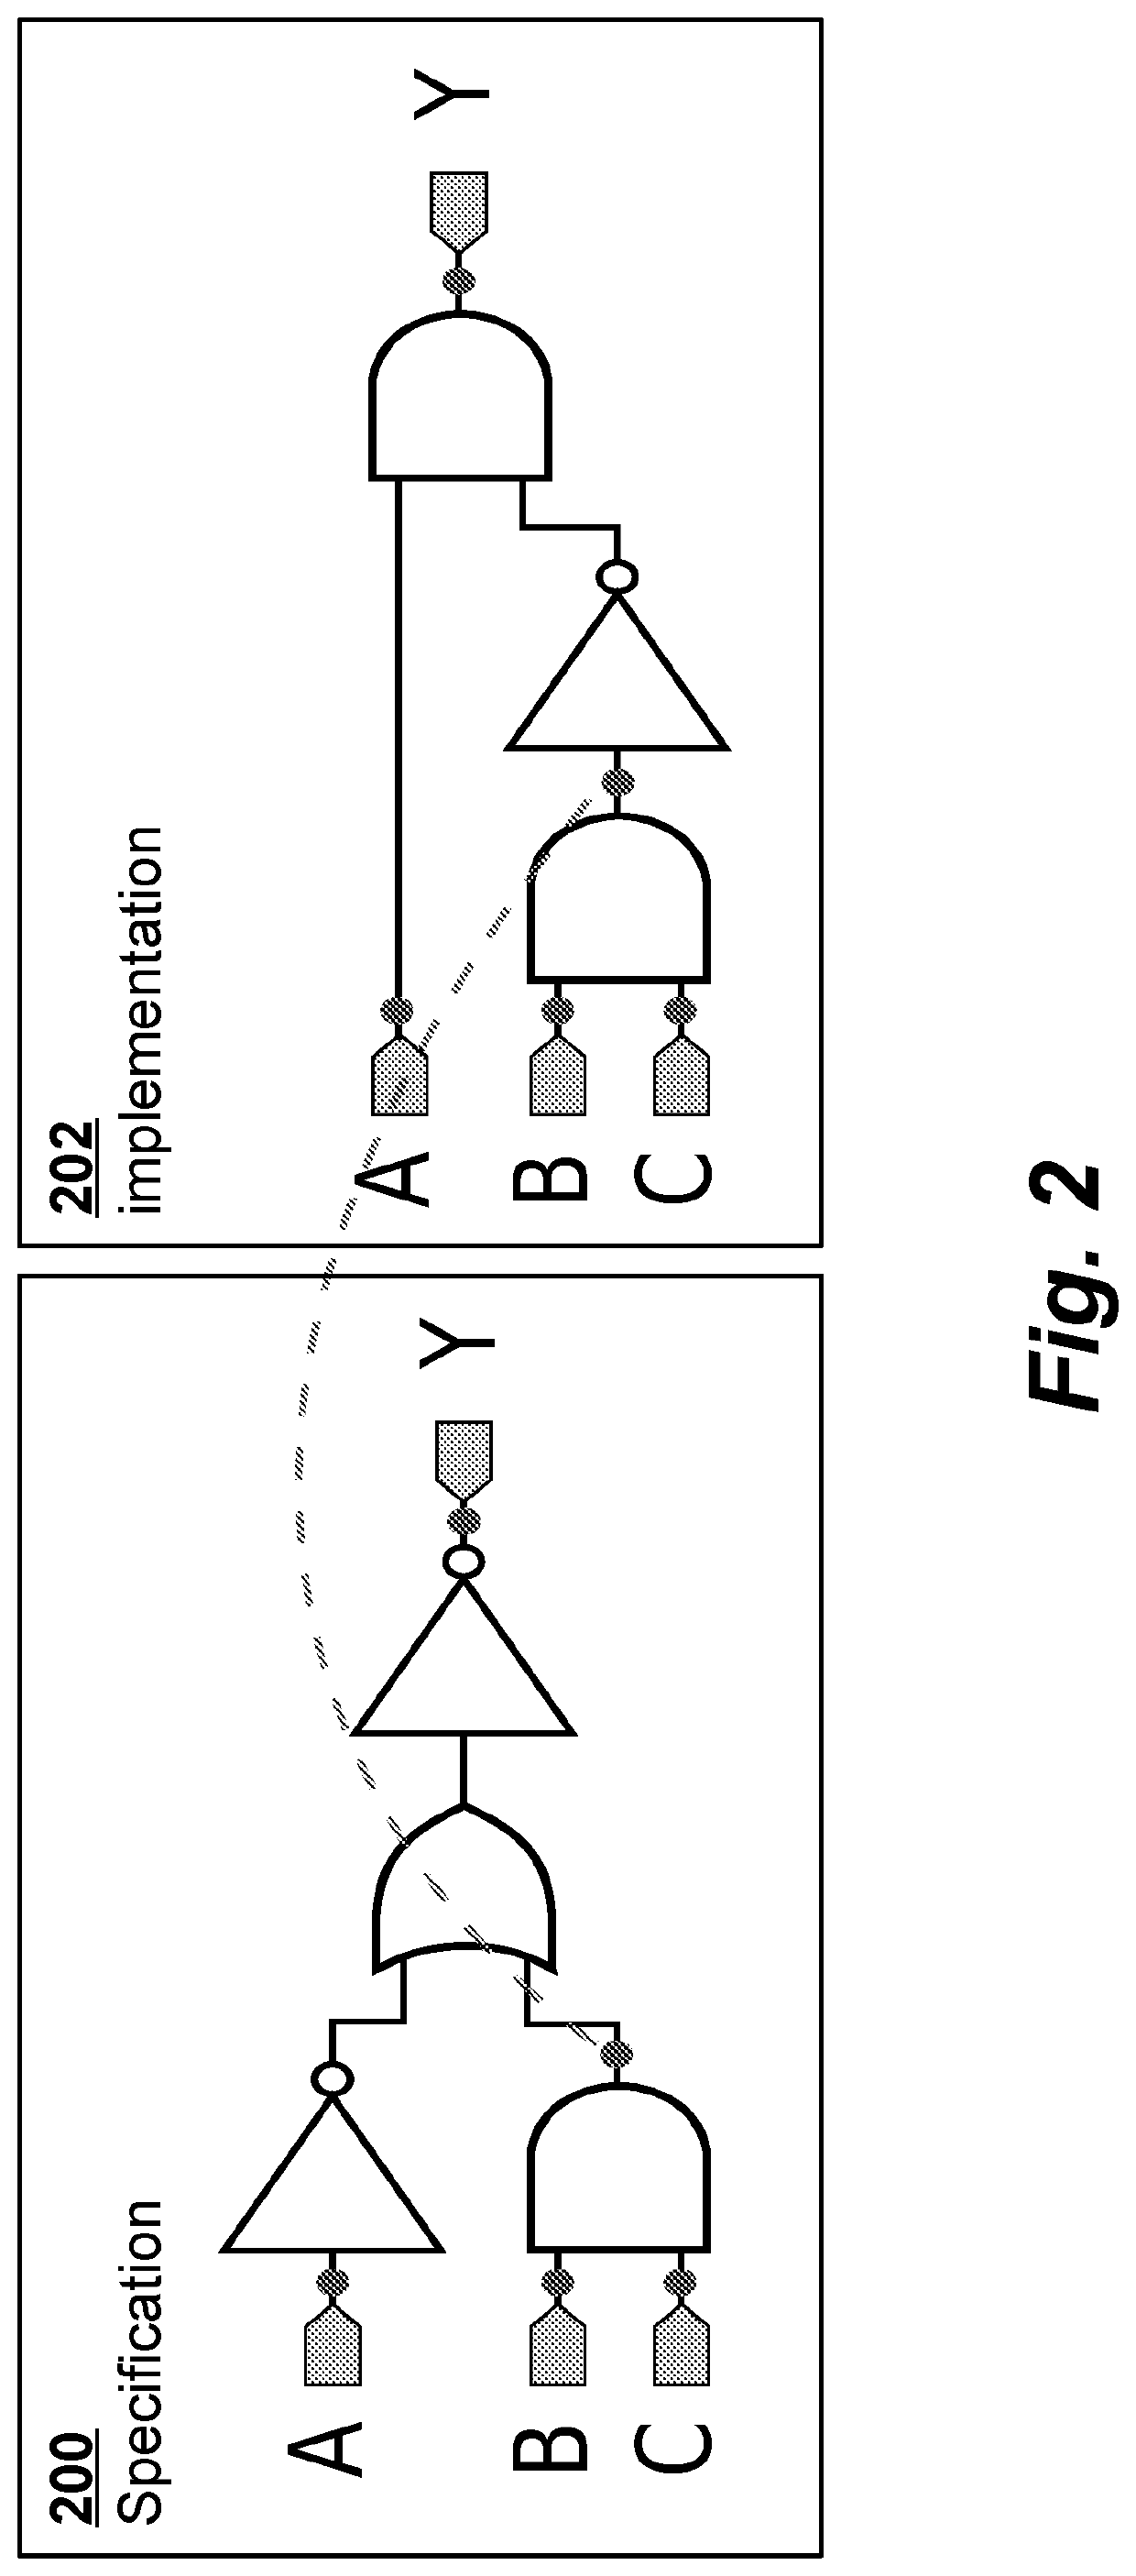 Interactive incremental synthesis flow for integrated circuit design